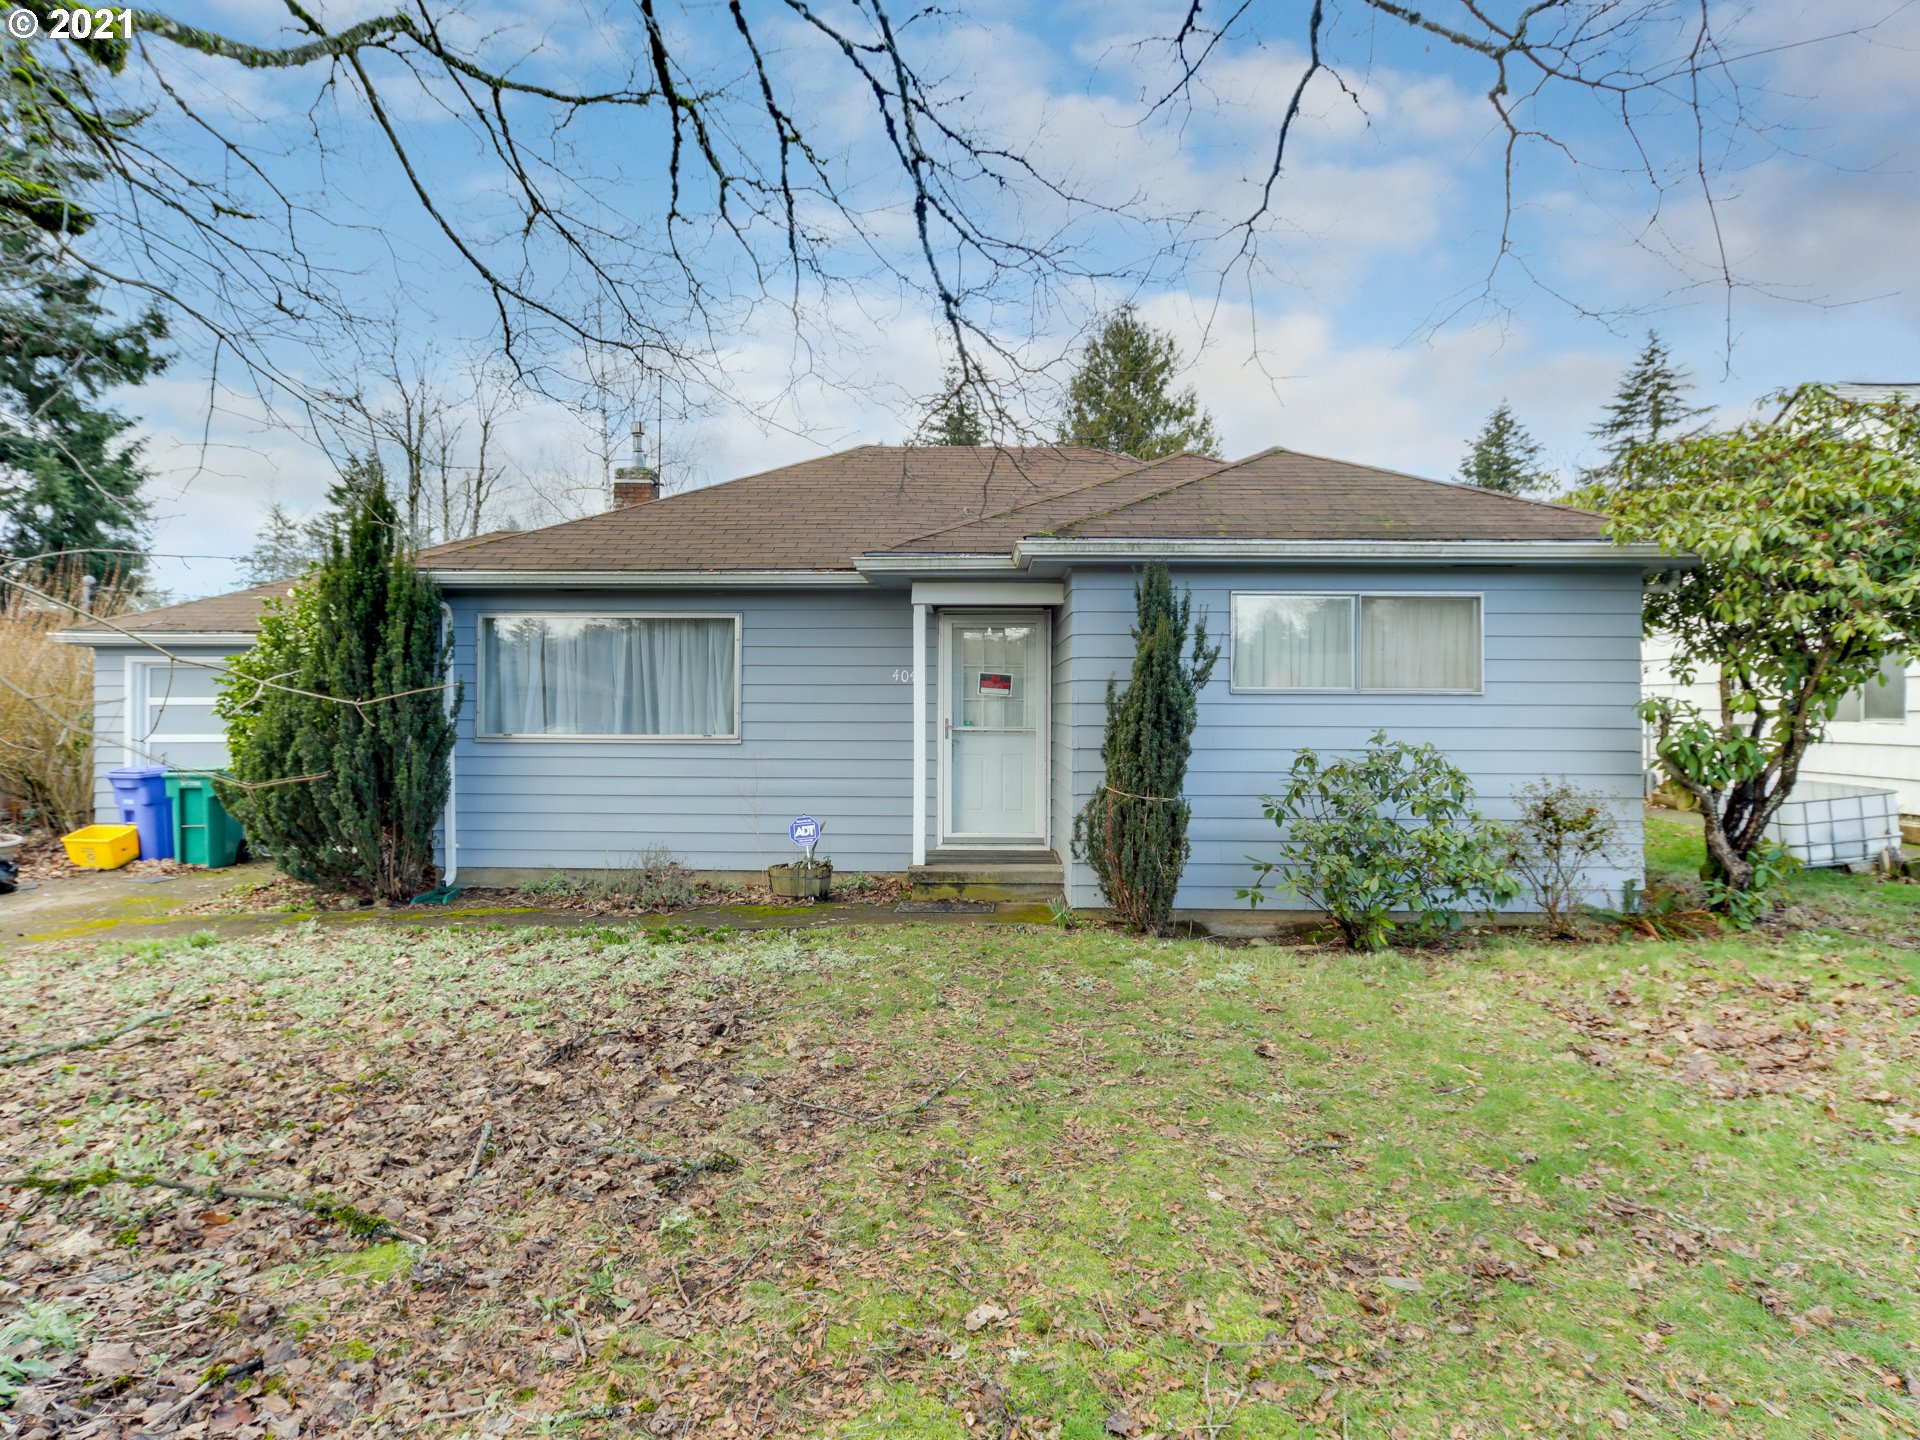 4049 SE 113TH AVE (1 of 24)